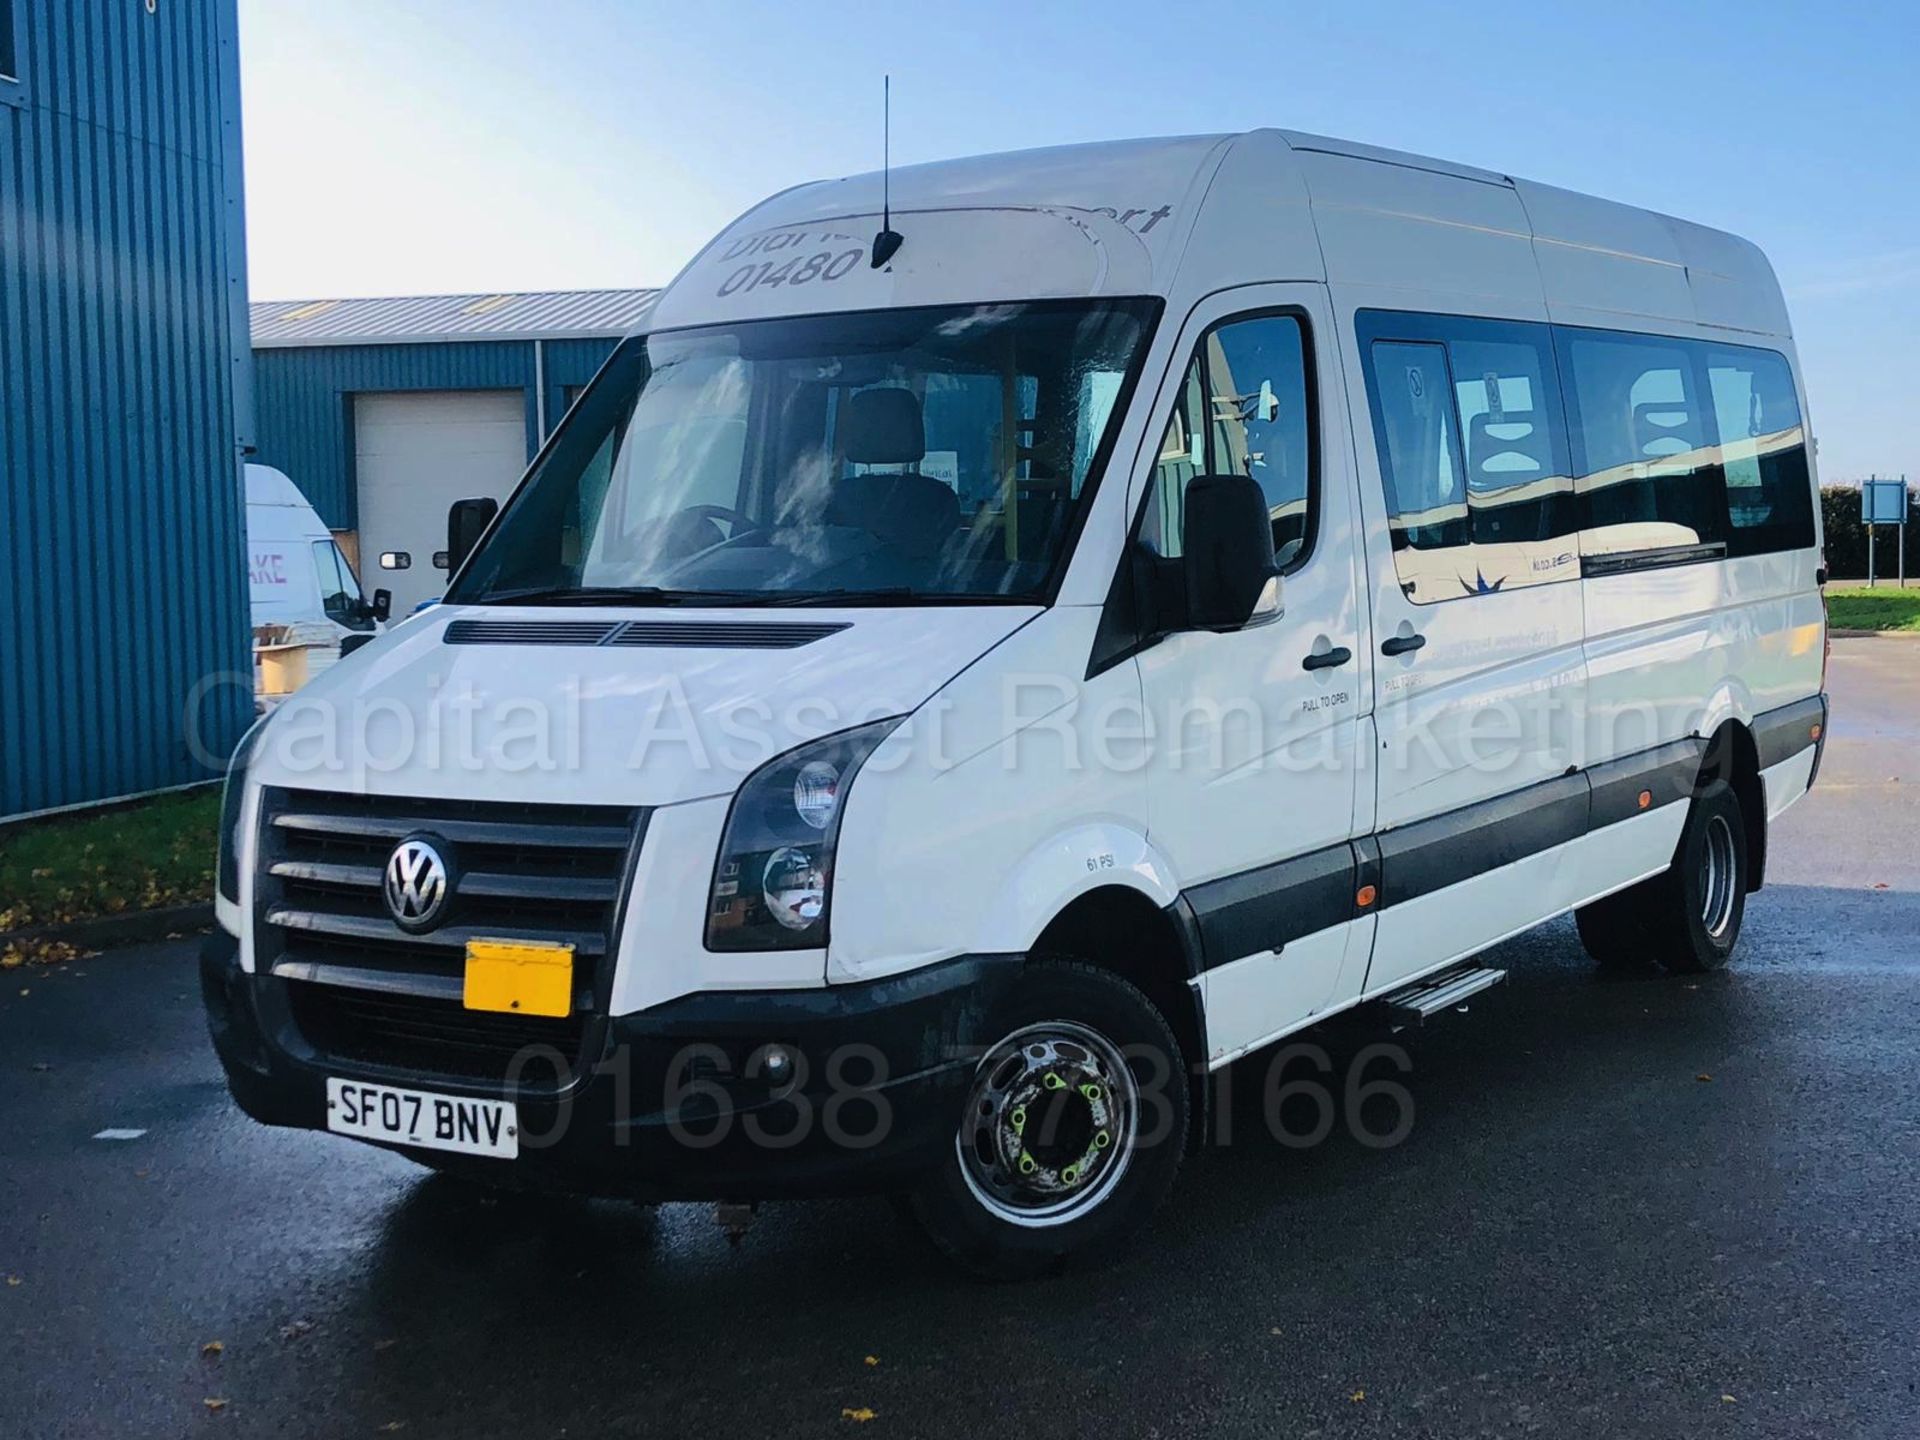 VOLKSWAGEN CRAFTER 2.5 TDI *LWB - 16 SEATER MINI-BUS / COACH* (2007) *ELECTRIC WHEEL CHAIR LIFT*